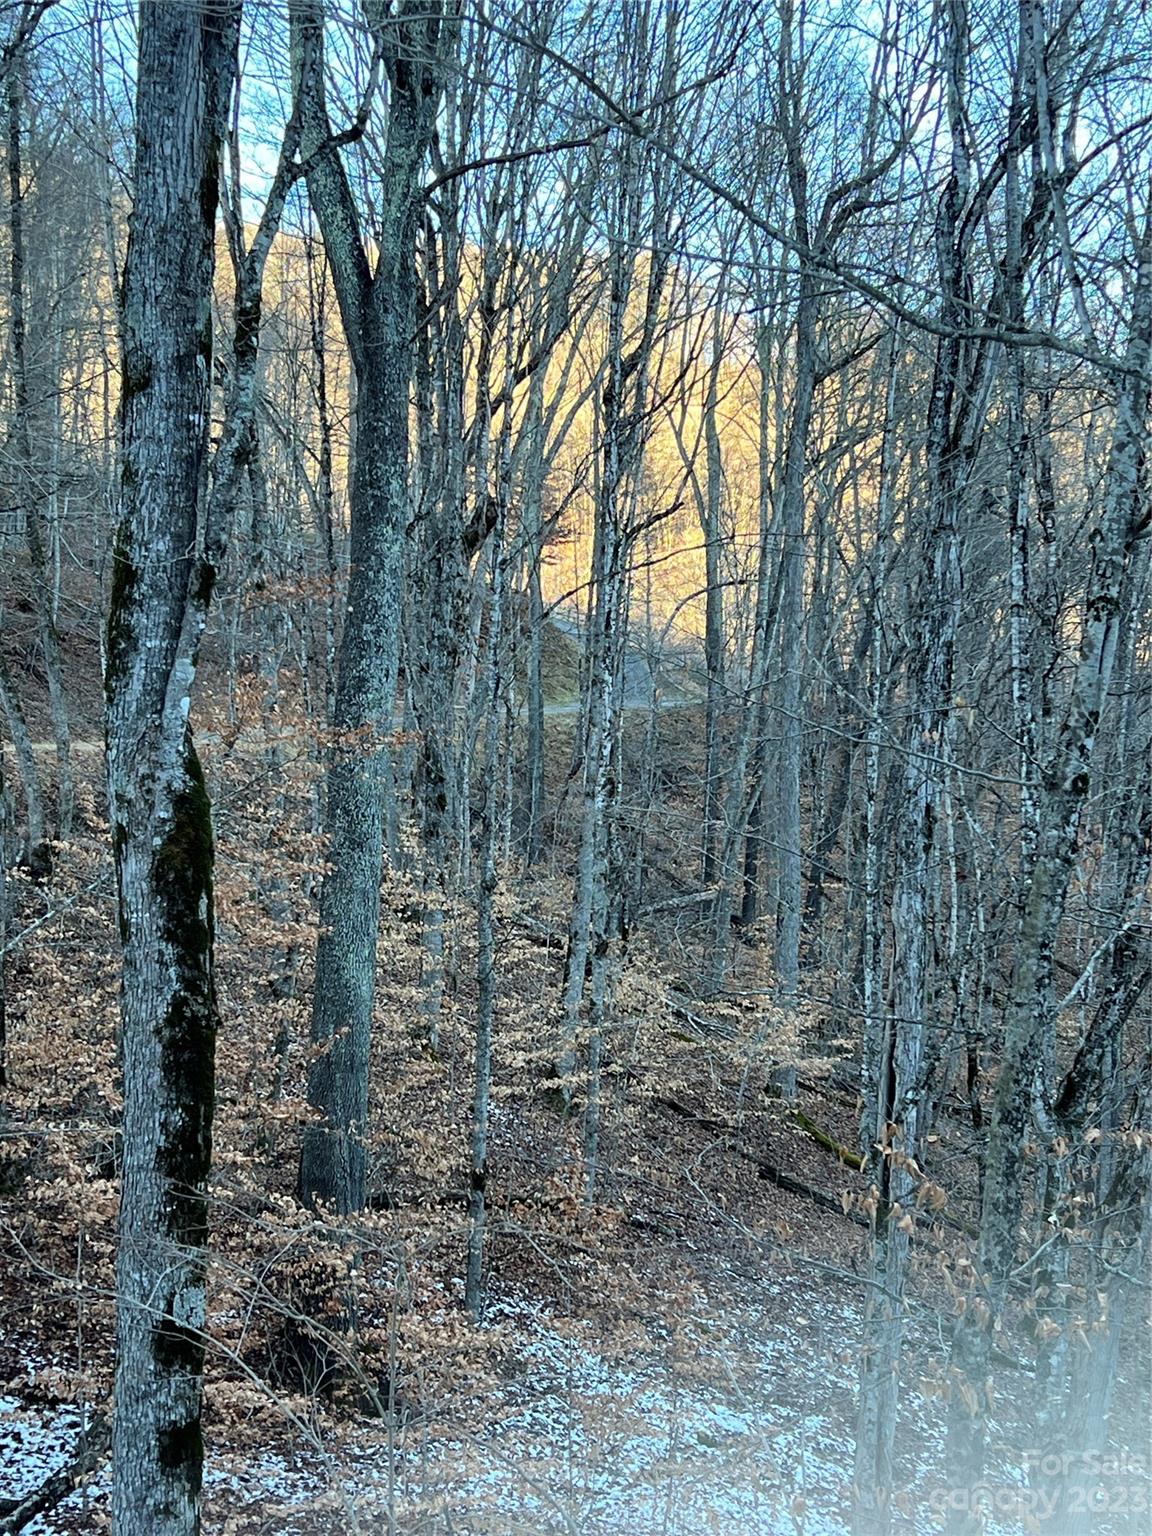 a view of a forest with trees in the background